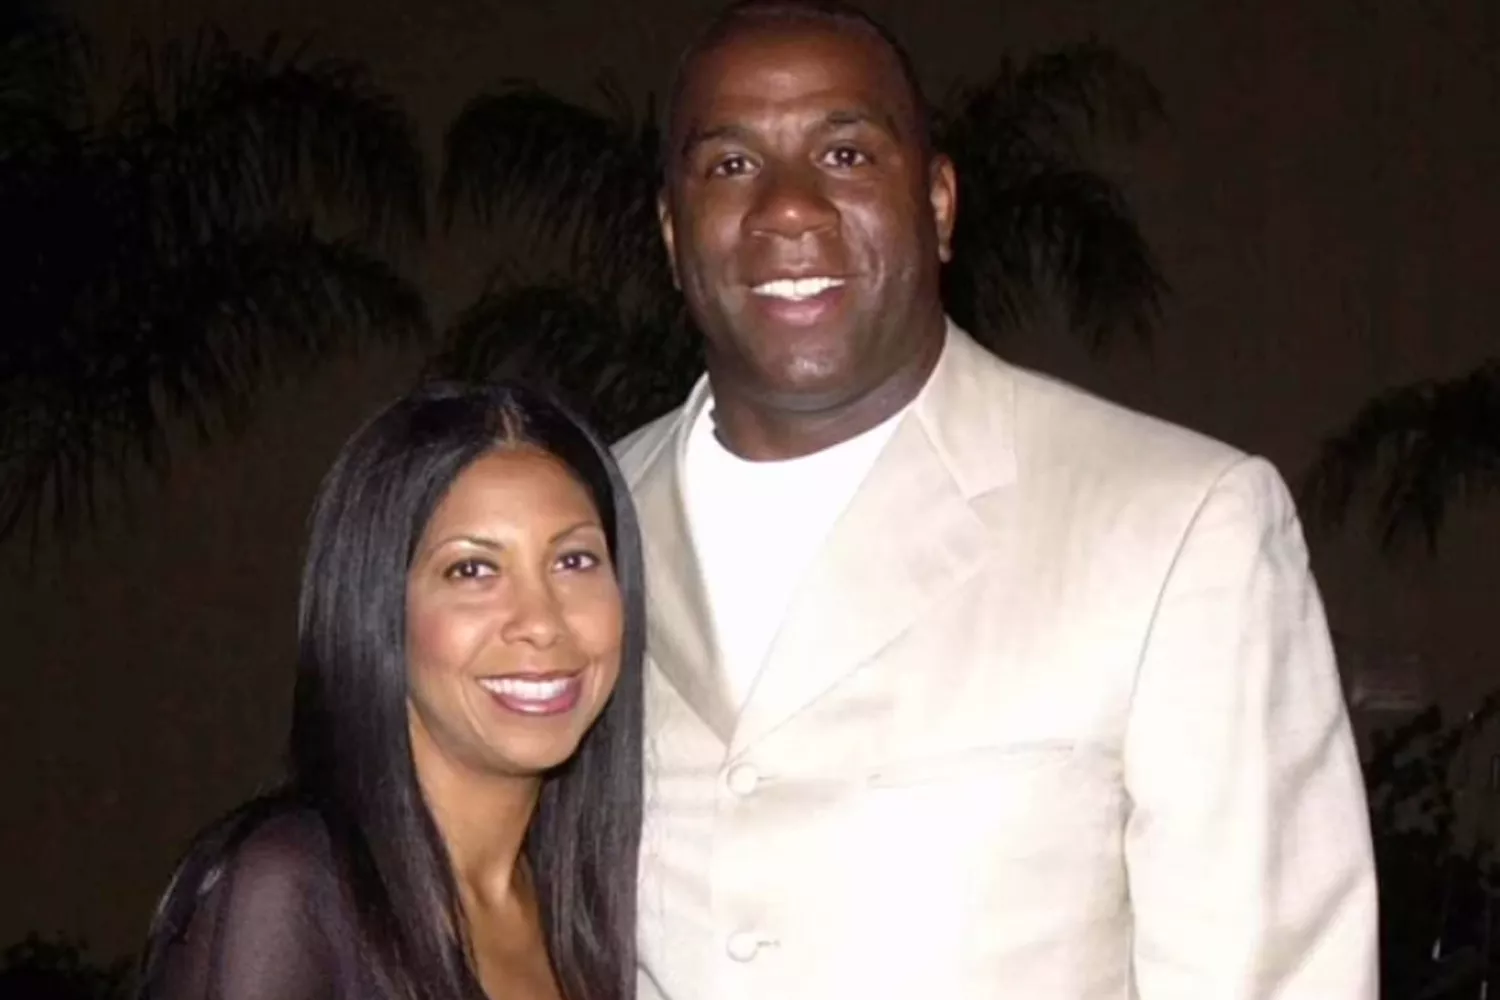 A love story of 3 decades - A brilliant career and a love story at first sight during youth made fans admire the legendary Magic Johnson and his wife even more as they celebrated their 32nd wedding anniversary